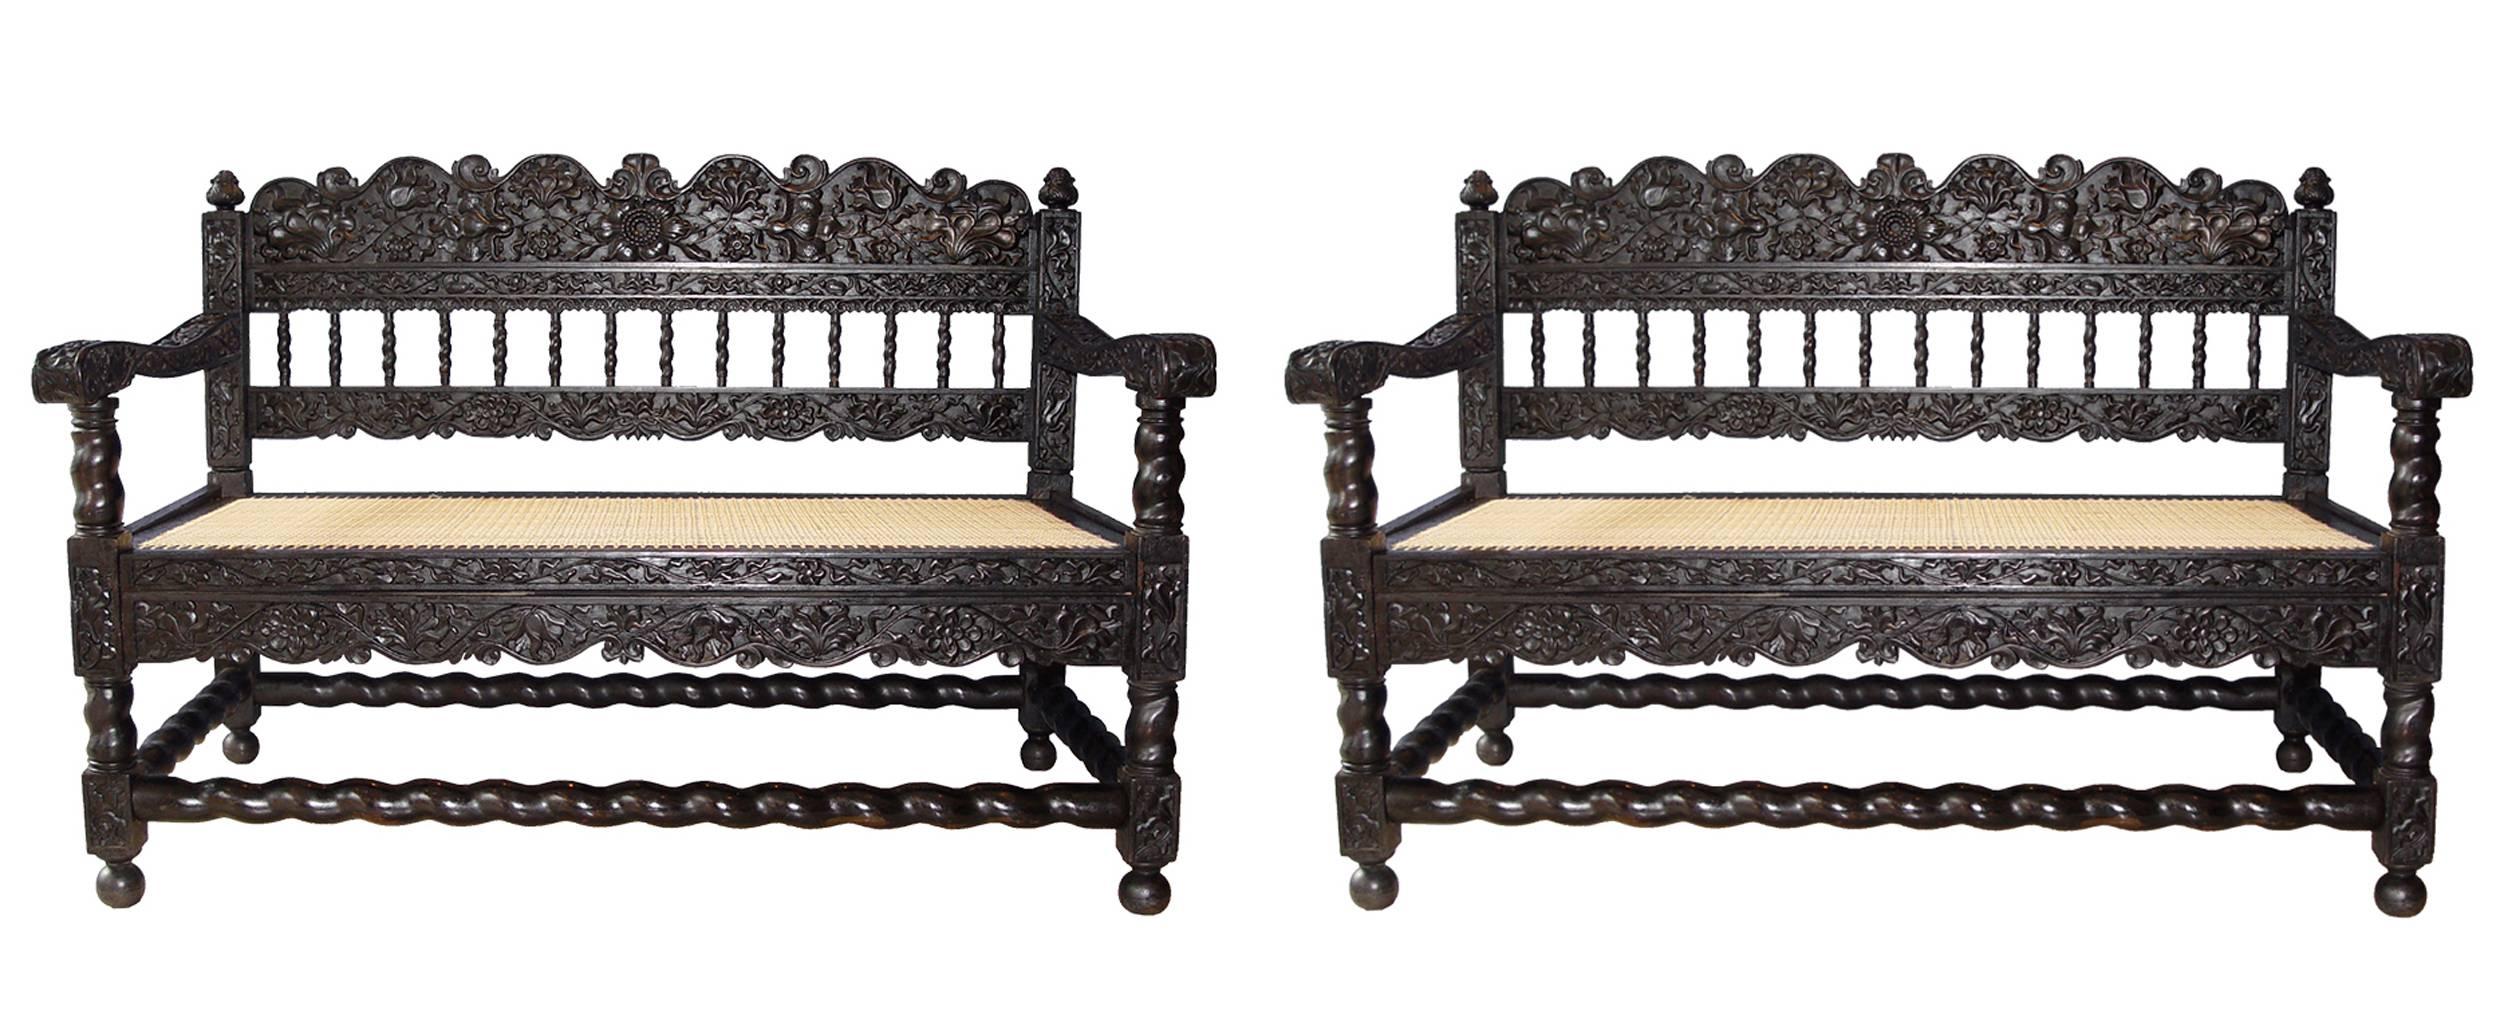 A very rare pair of ebony carved settees,
Indonesia, Java,
18th century (1680-1720).
Woven contemporary cane seat.
Measures: W 46 in x D 26.7in x seat Ht 15.7in x Ht of the back 33.07in.

Ancient Parisian collection.
Very good